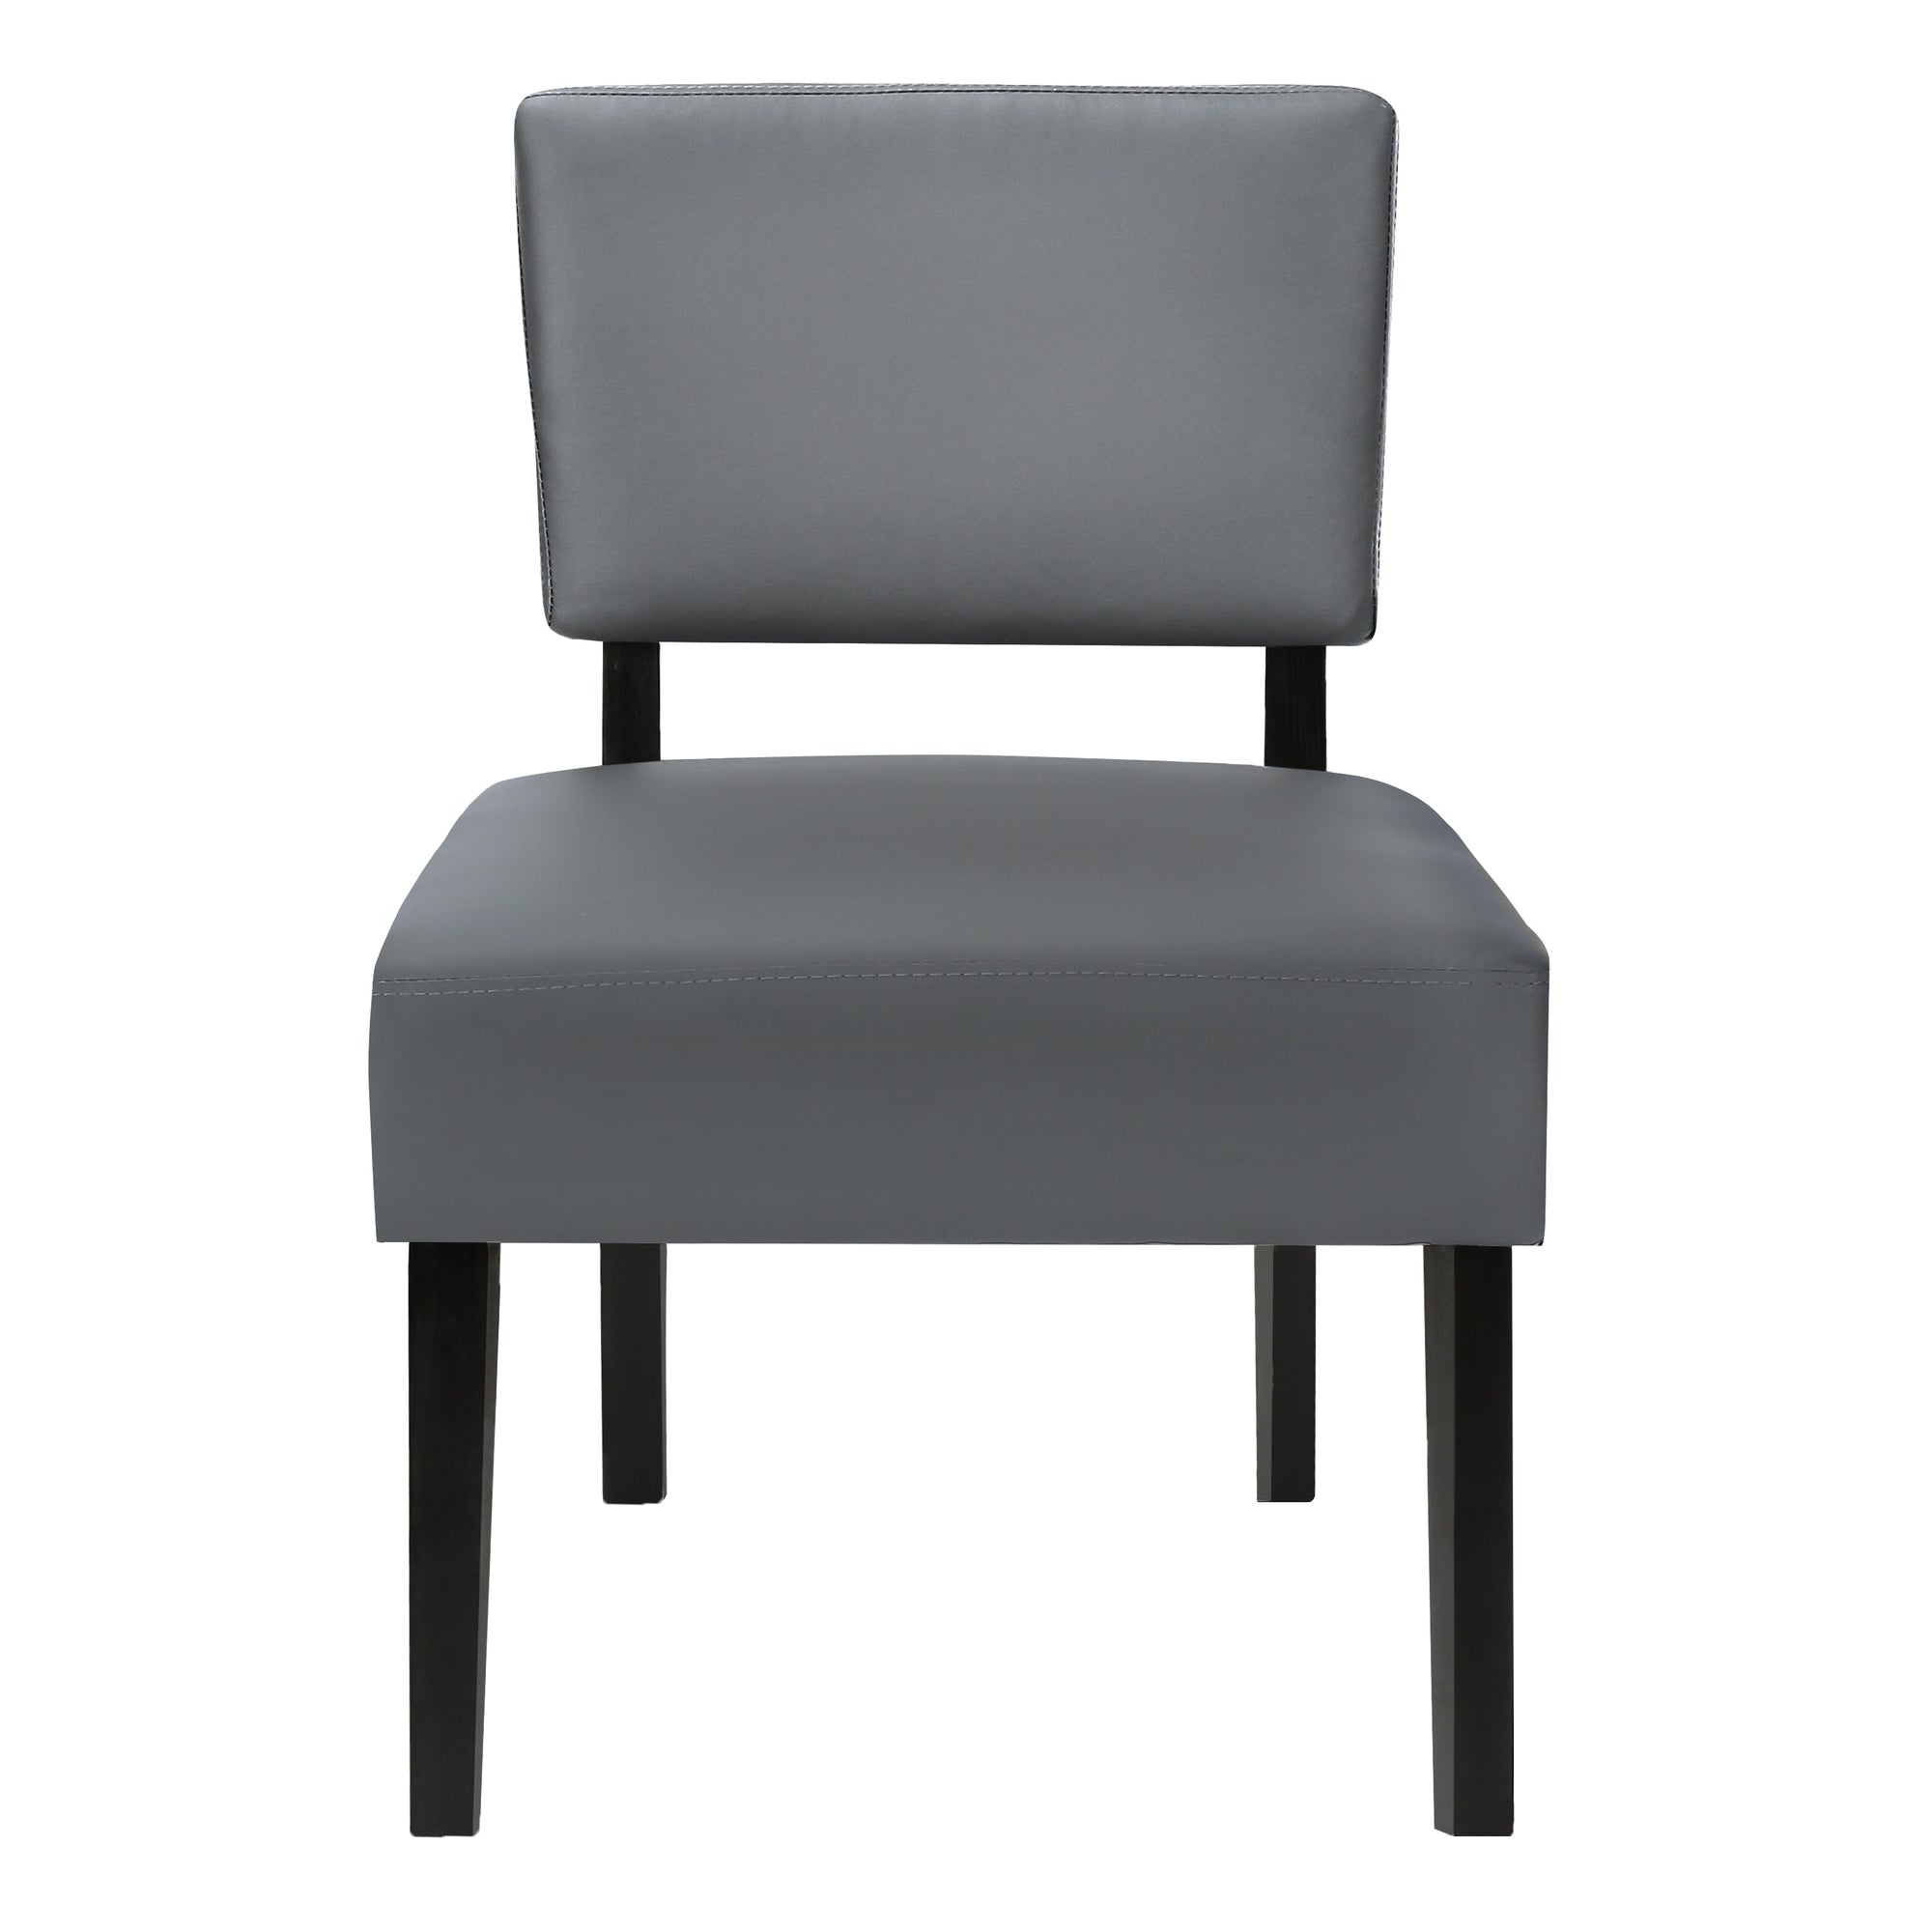 Accent Chair - Grey Leather-Look Fabric